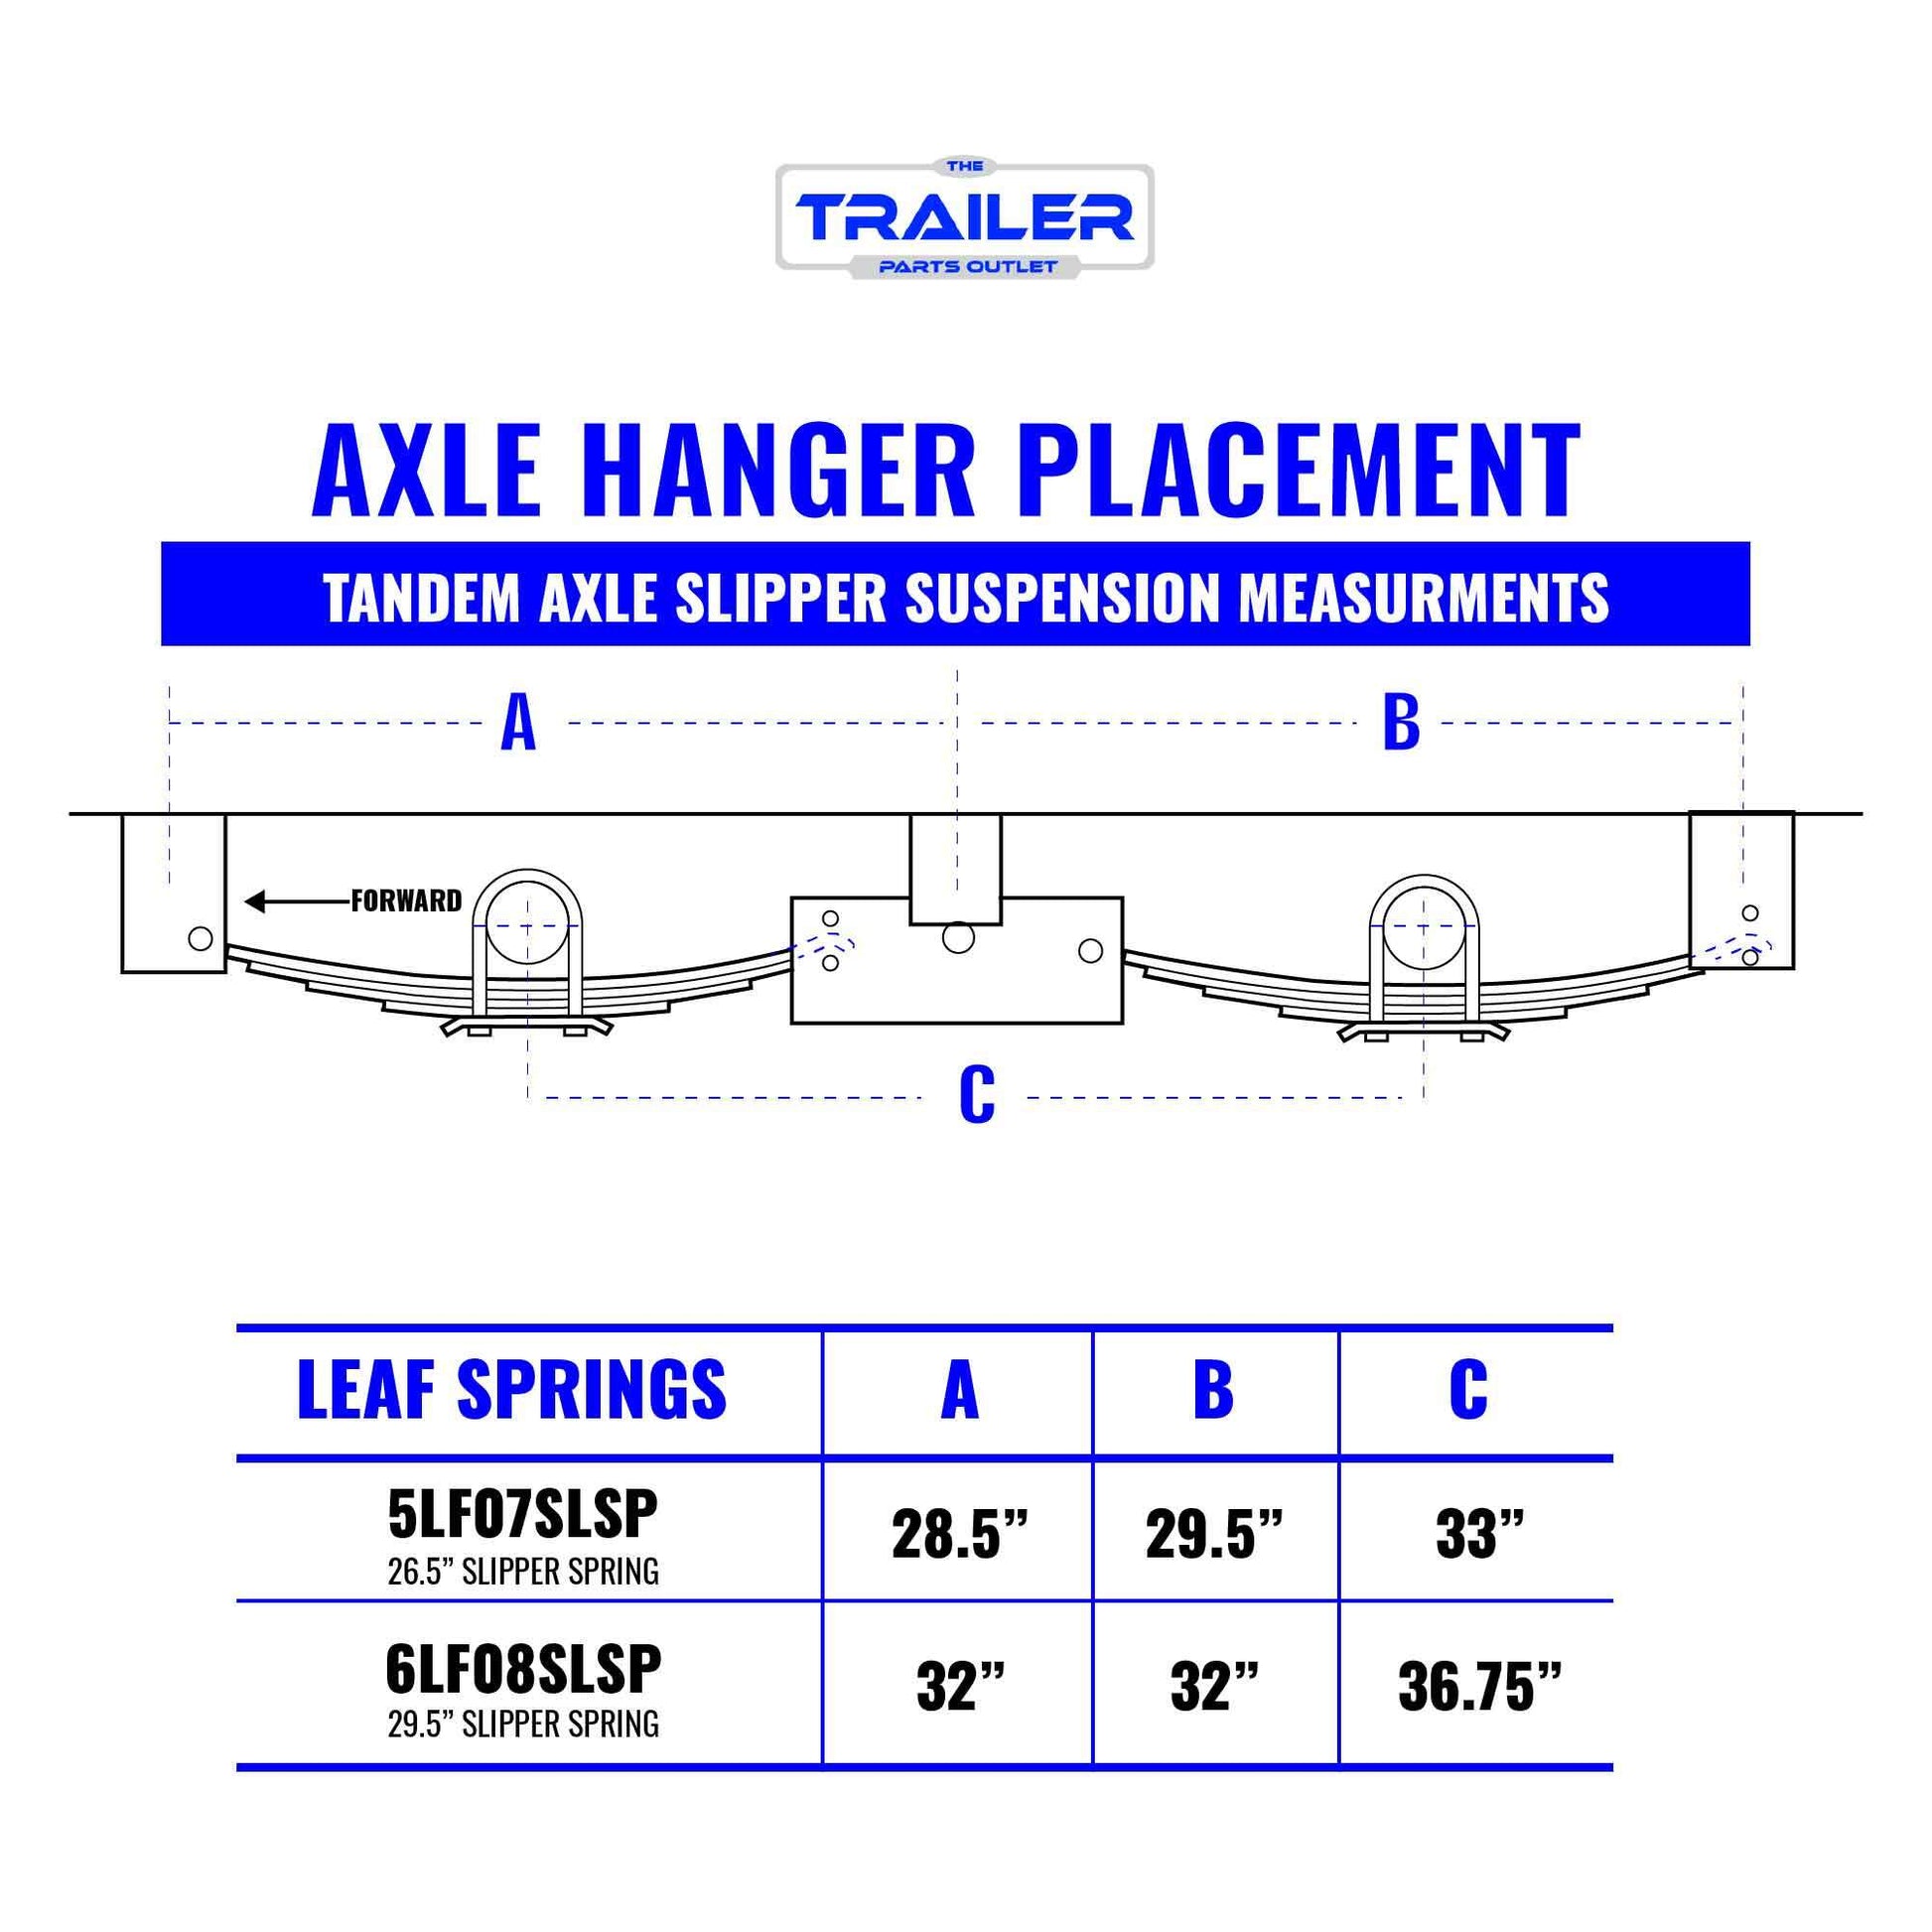 8000 lb TK Tandem Axle Bumper Pull Trailer Parts Kit - 16K Capacity HD (Complete Original Series) 9/16" Studs - The Trailer Parts Outlet